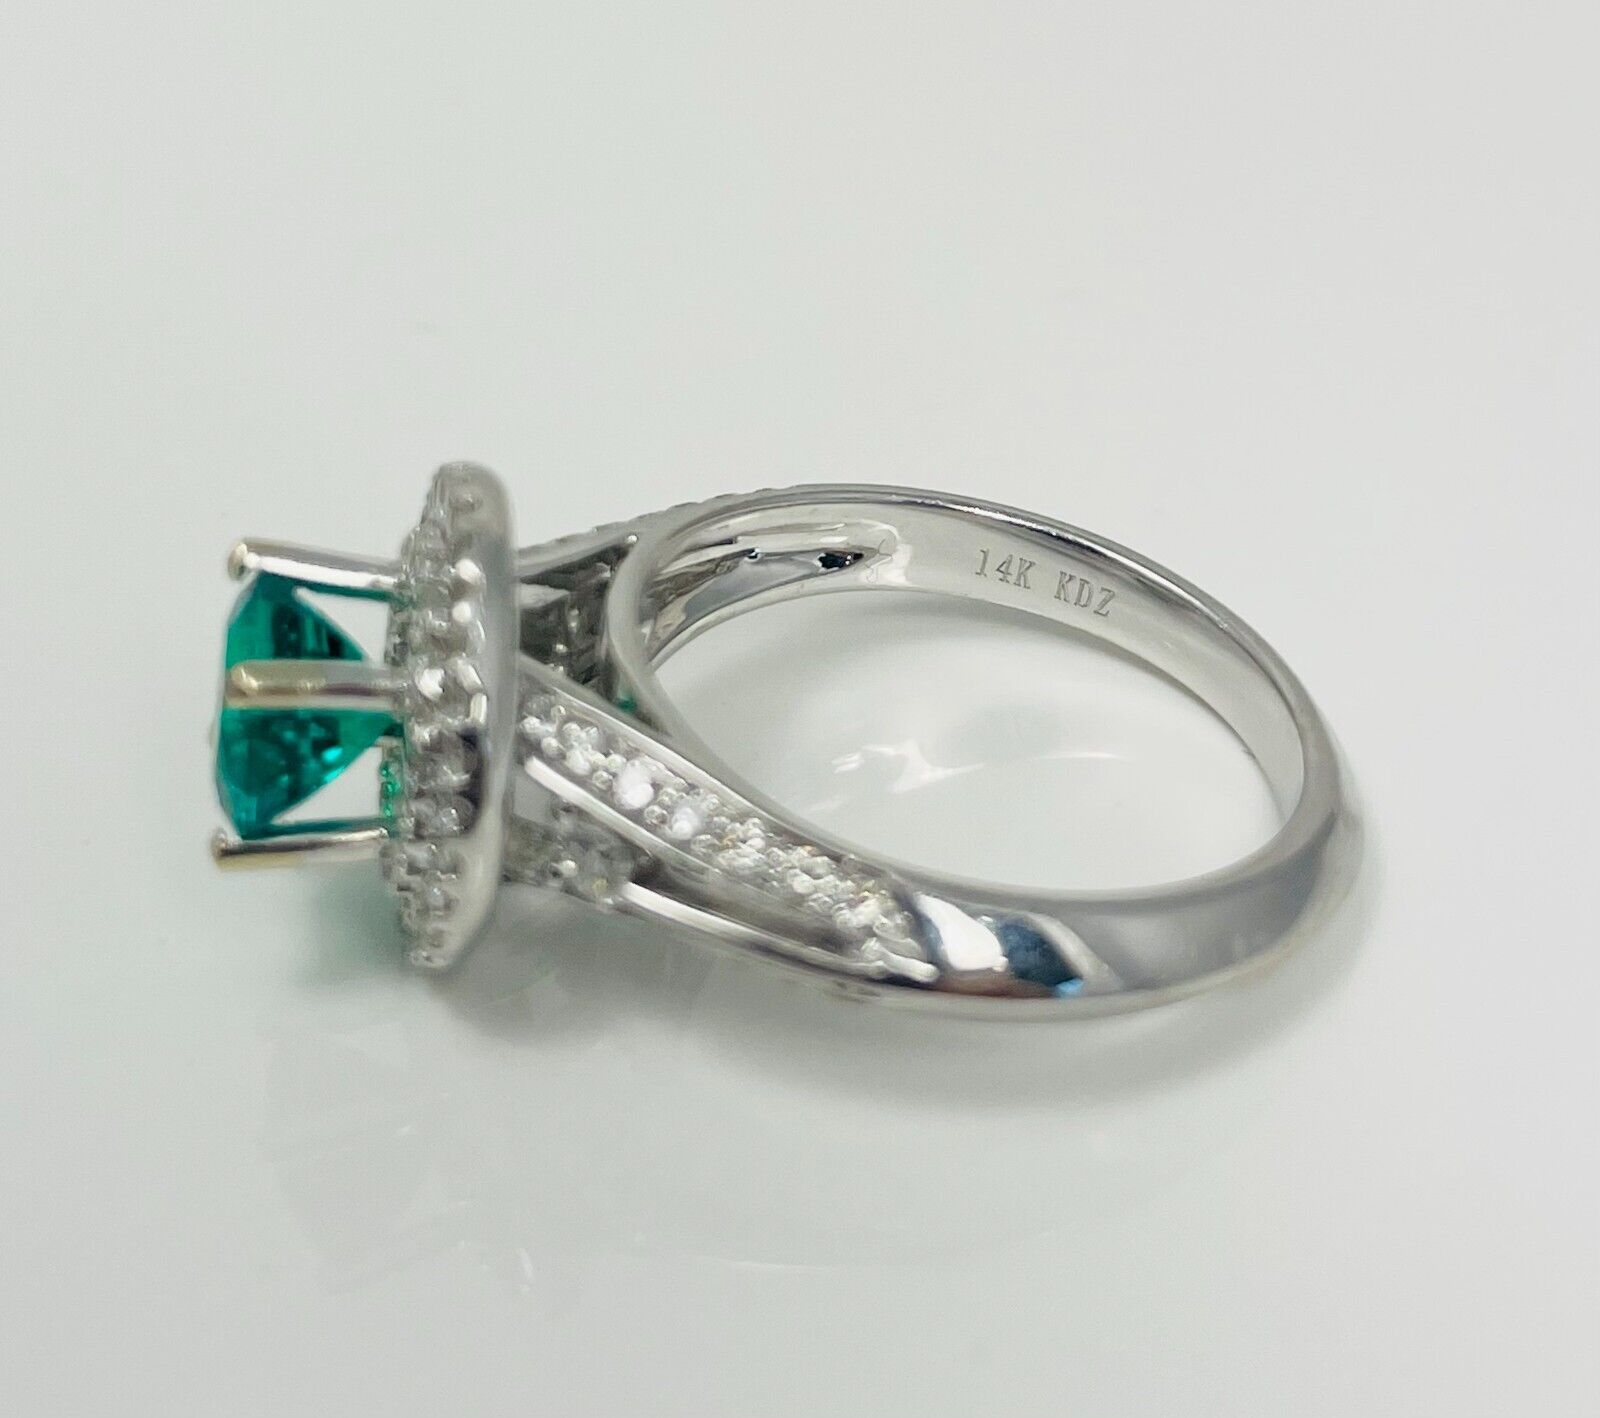 ENDED Have one to sell? Sell now 1.50CTW Lab Created Emerald Natural Diamond 14k White Gold Ring